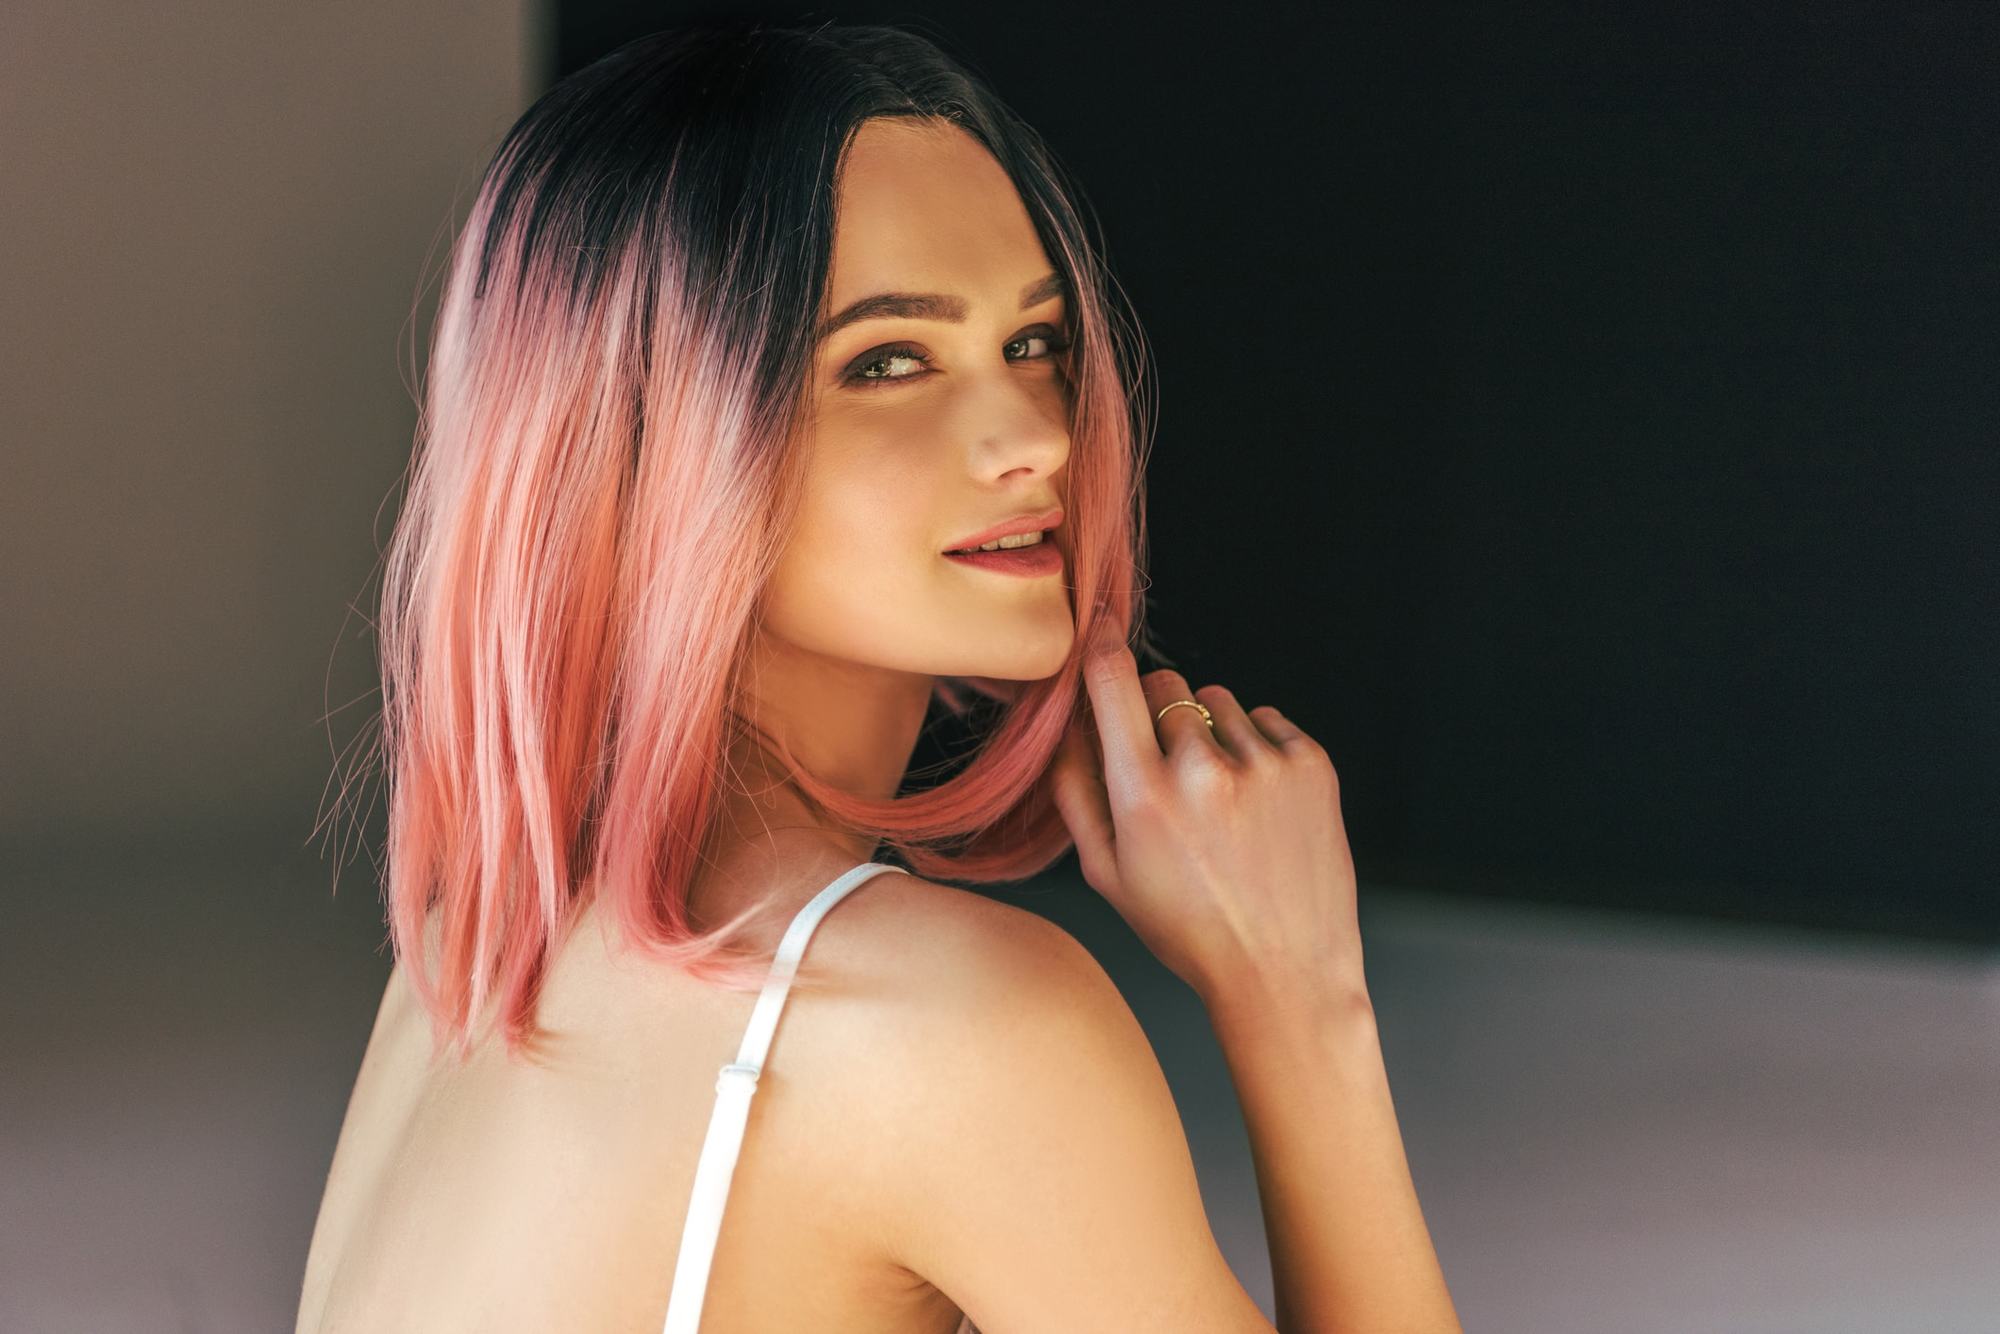 1. Silver Blue Pink Hair Ideas: 10 Stunning Styles to Try - wide 10